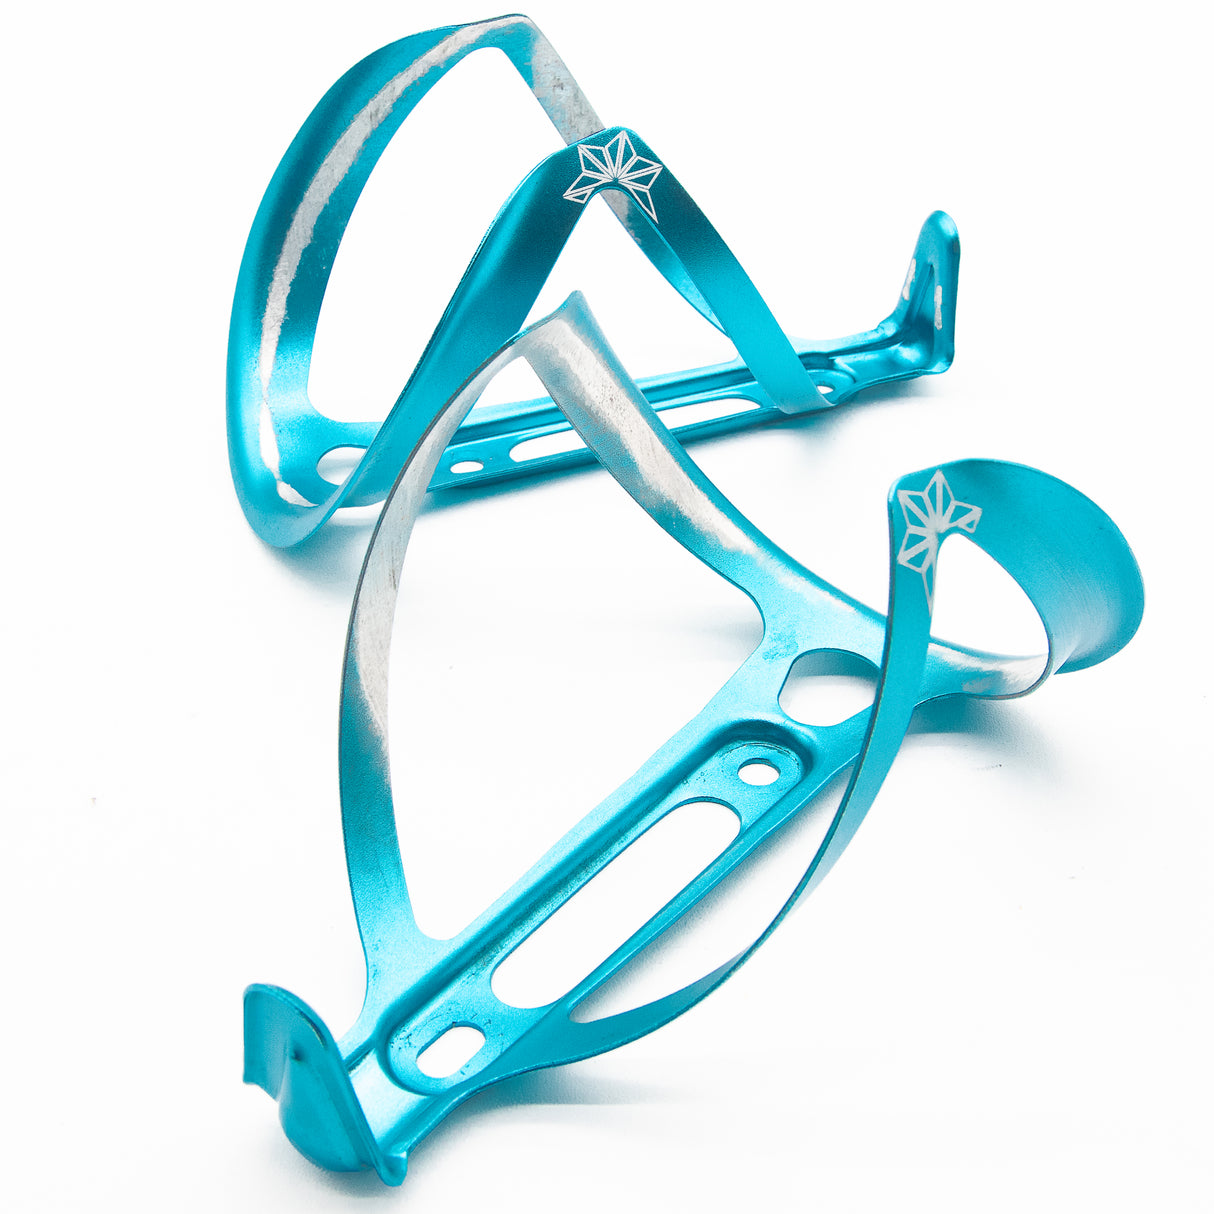 Supacaz Fly Cage Ano Bottle Cages Blue Pair 35g